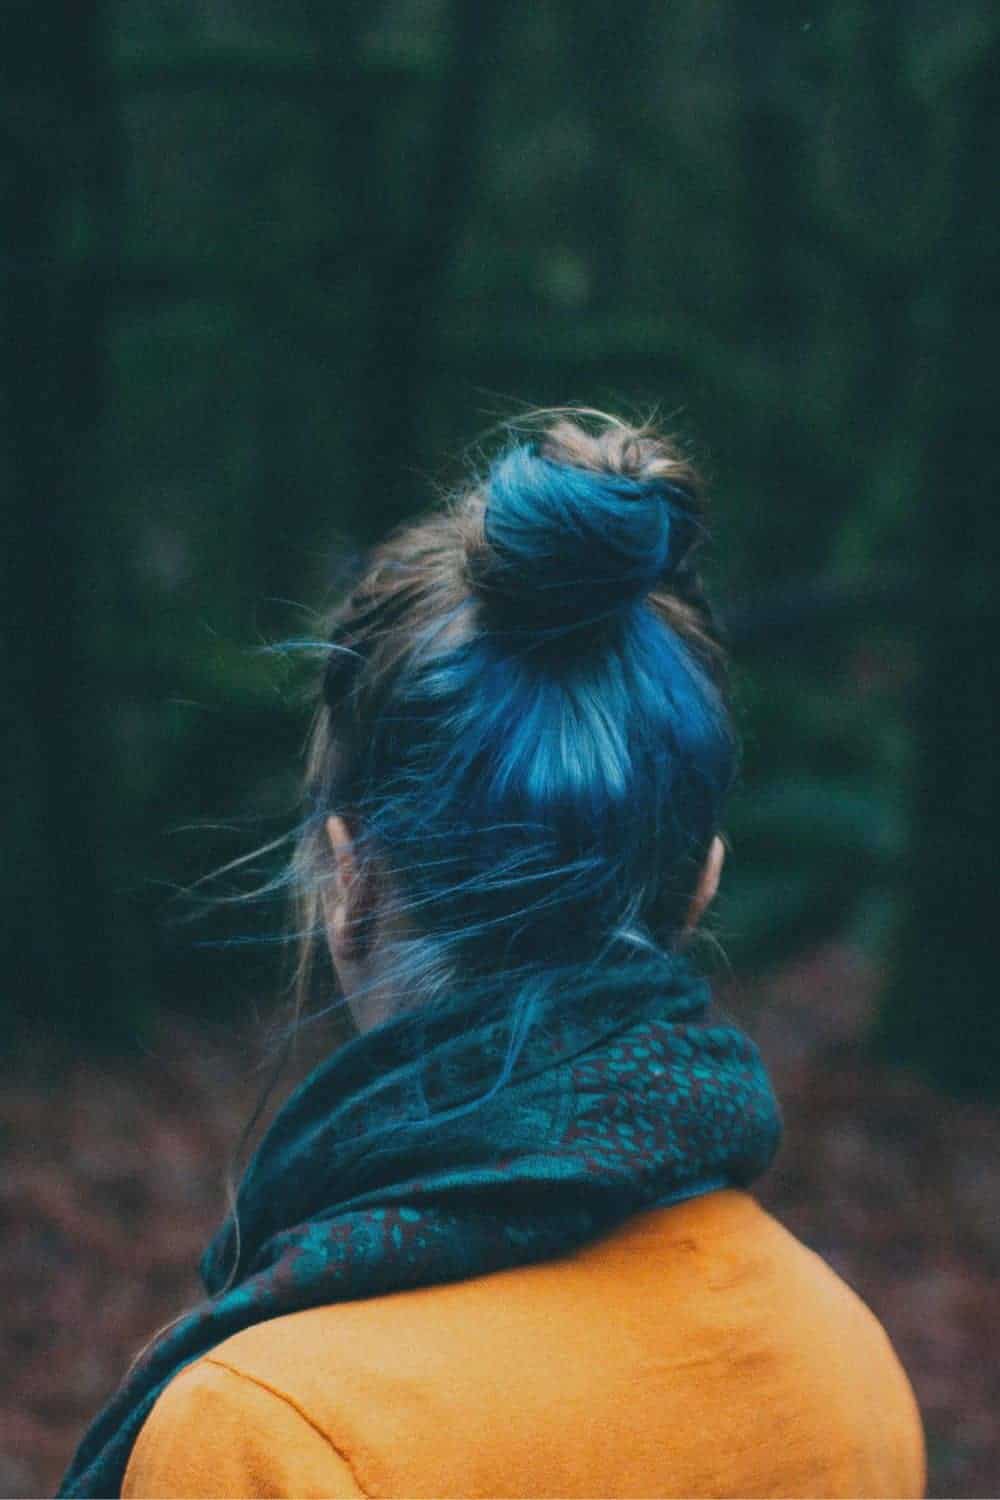  Girl with Blue / black hair with a yellow jacket 